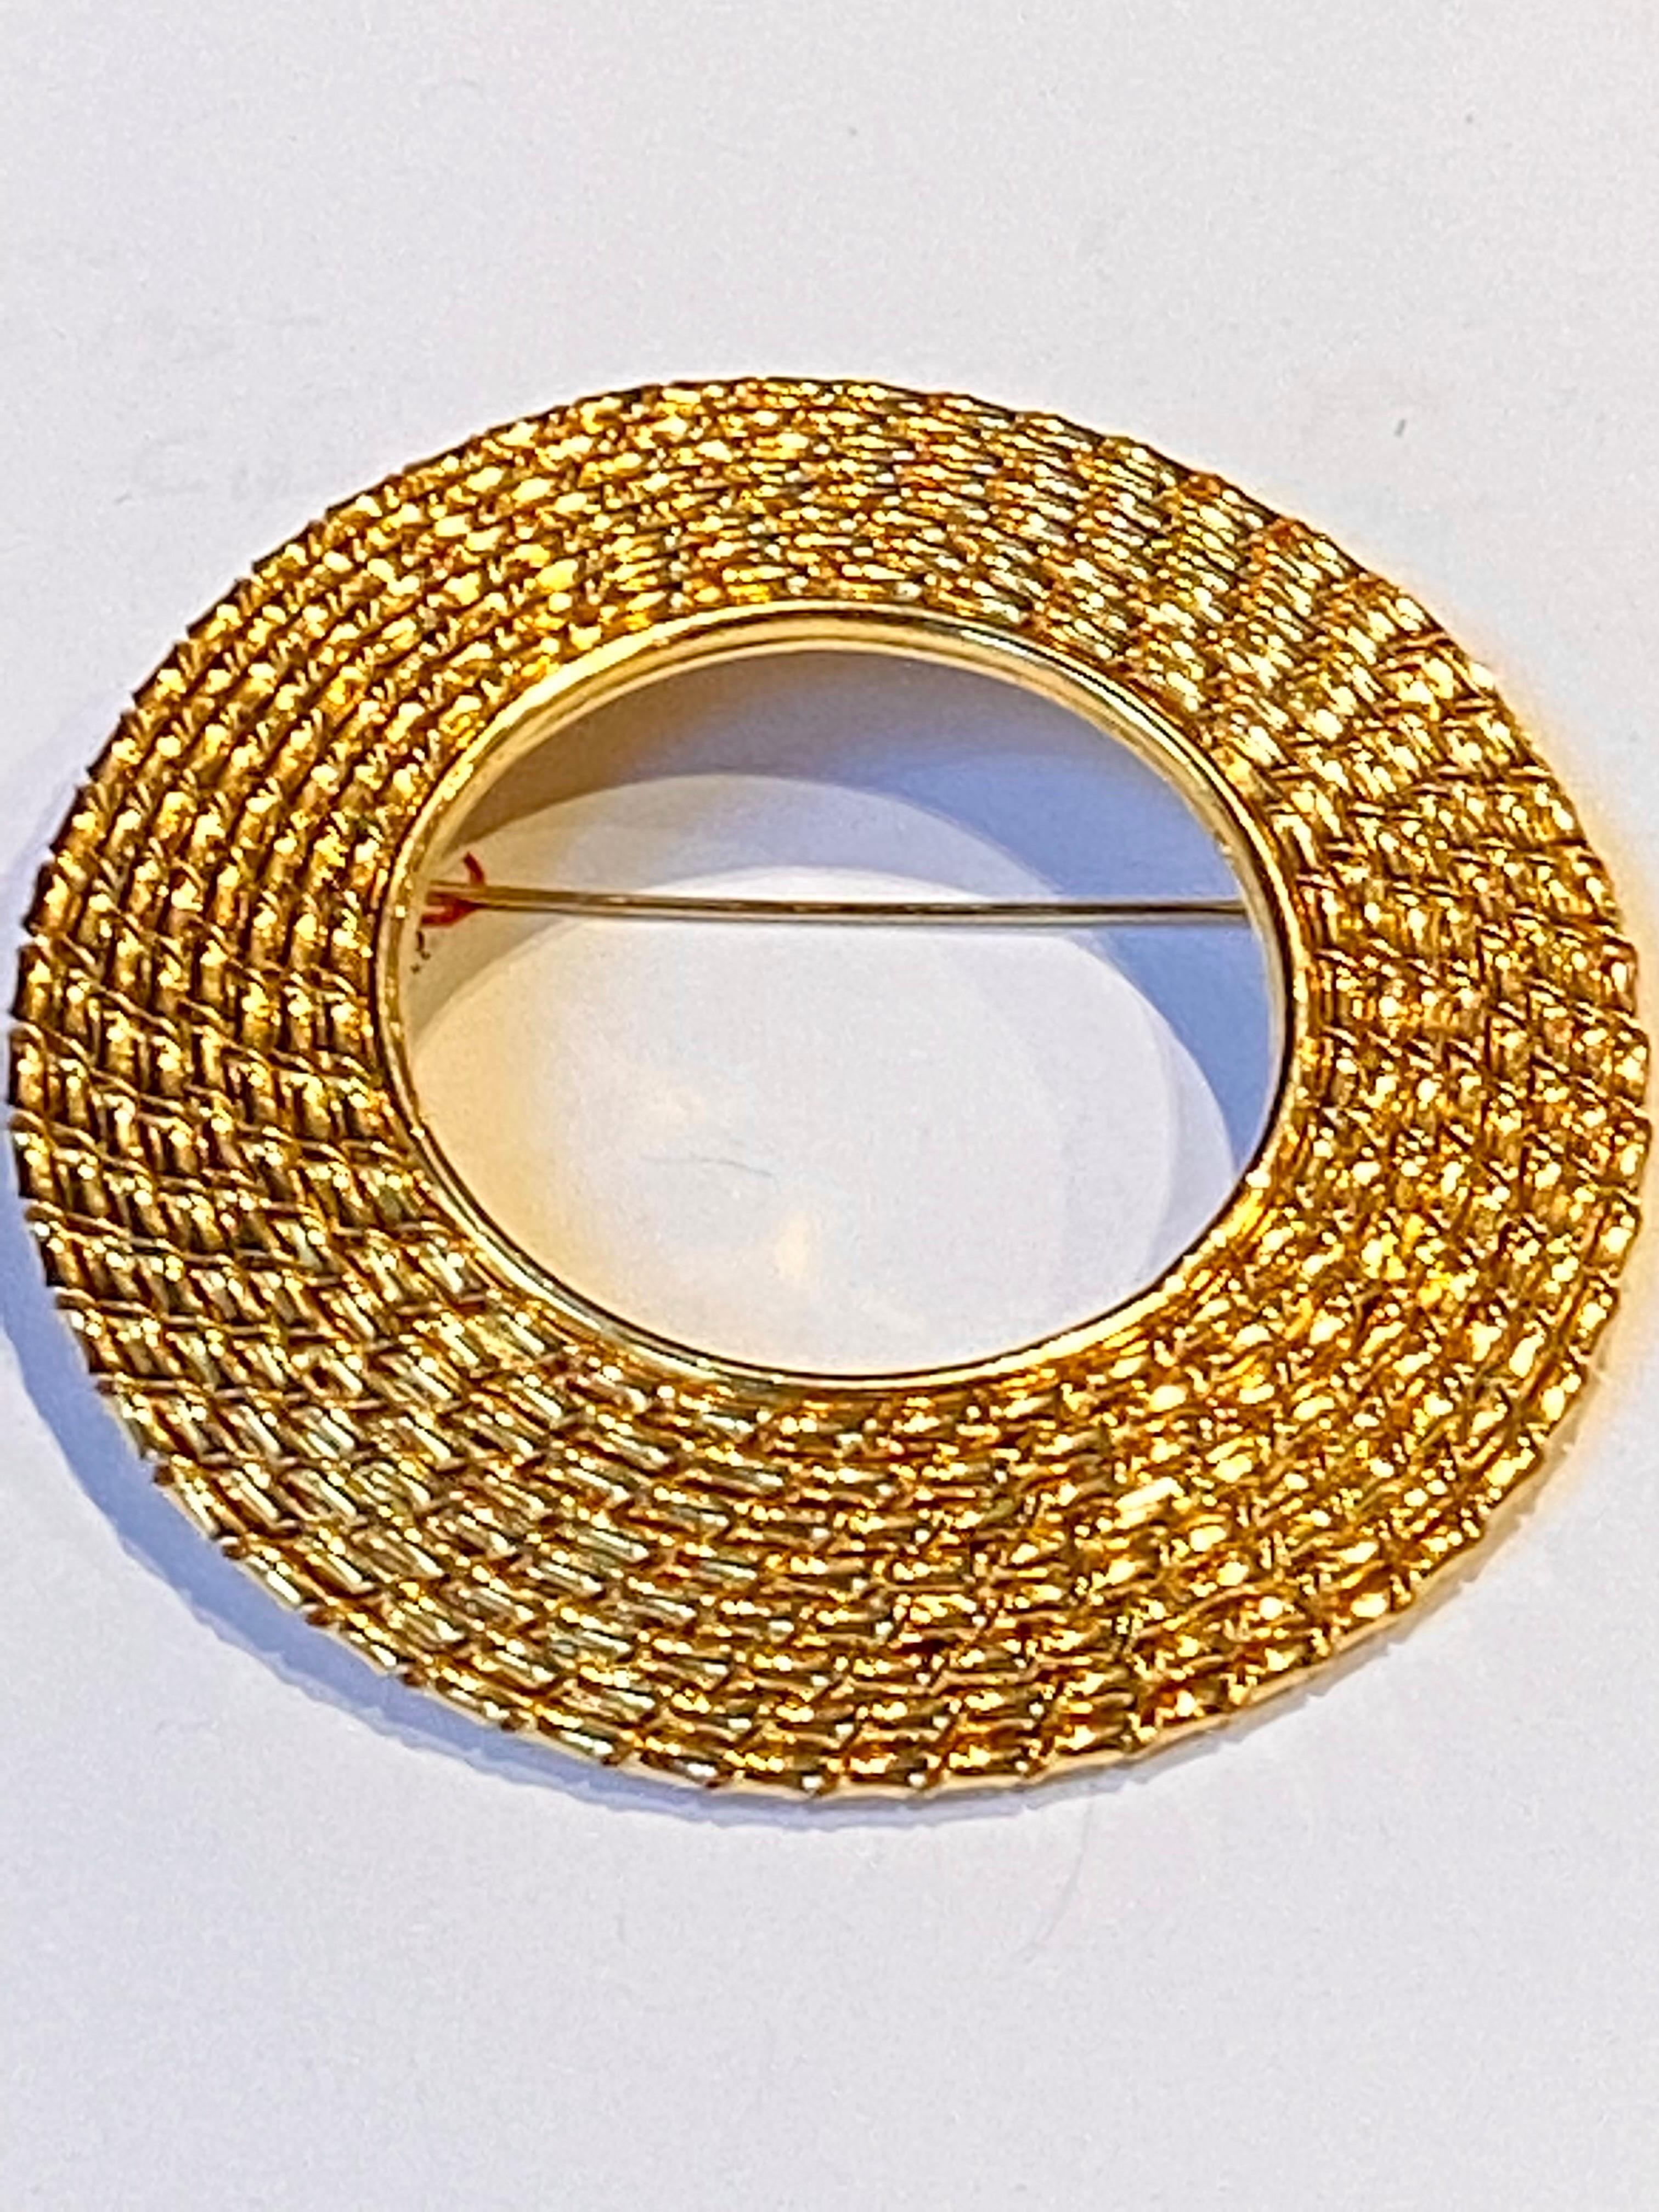 
The sun, the moon and the circle of life all symbolized by the circle. A classic shape as executed here by fashion designer Gianfranco Ferre in the 1980s. This circle pin is 3 inches in diameter. The 18K gold plate lightly domed ring is .75 of an